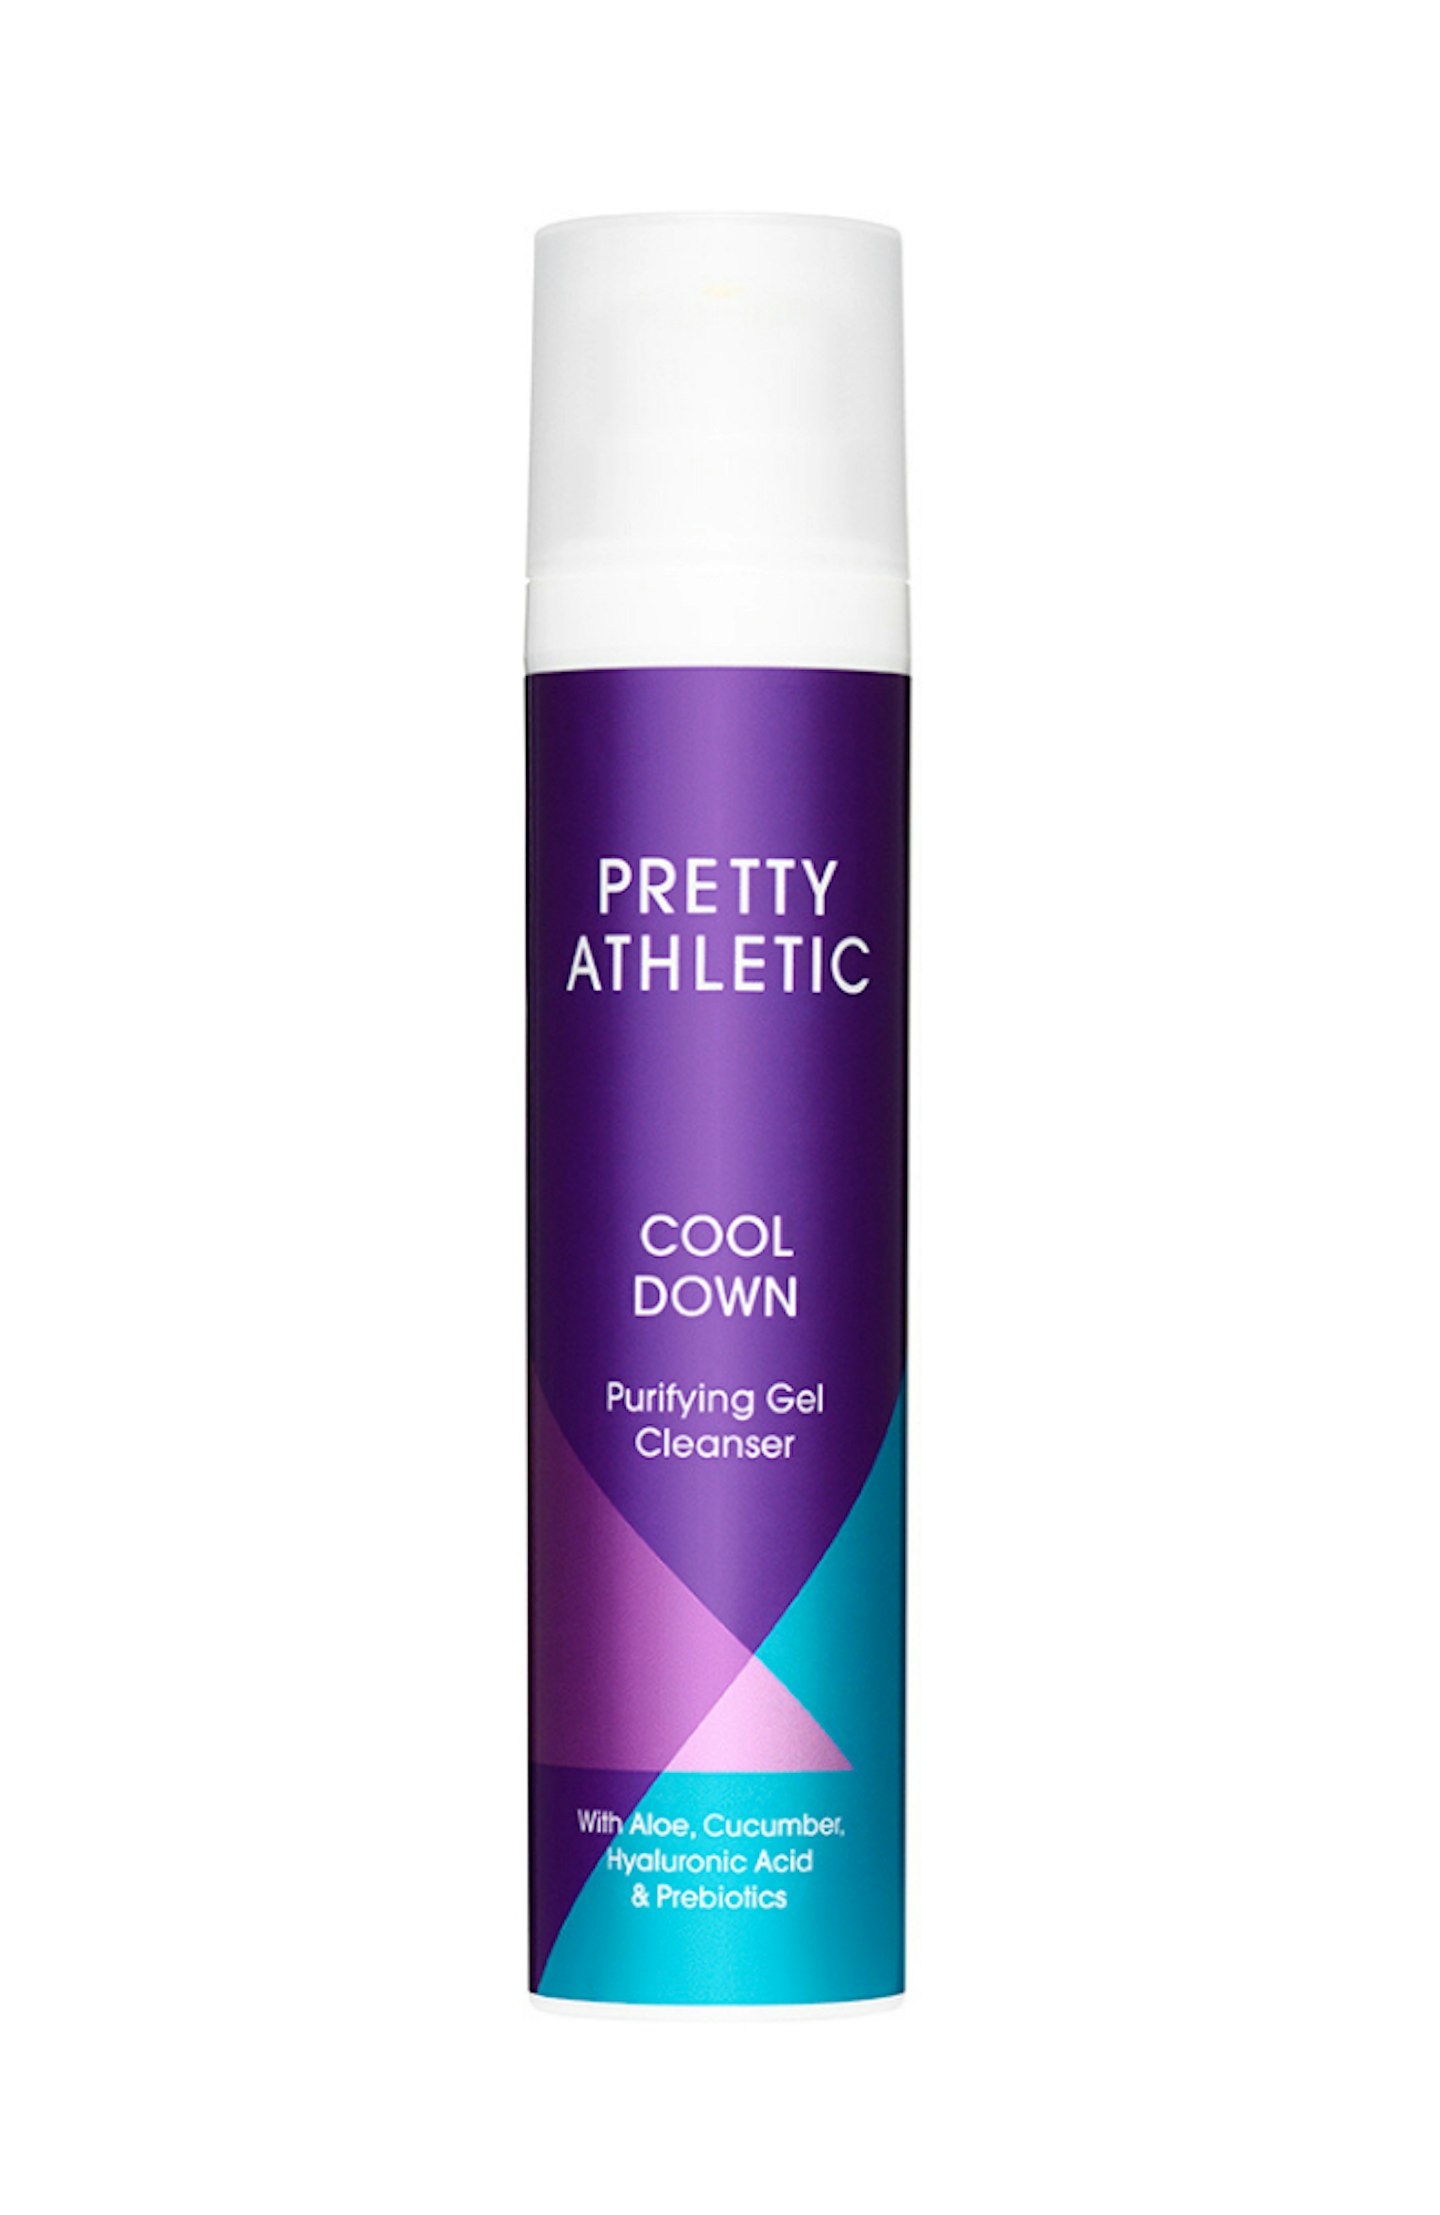 Pretty Athletic, Cool Down: Purifying Gel Cleanser, £18